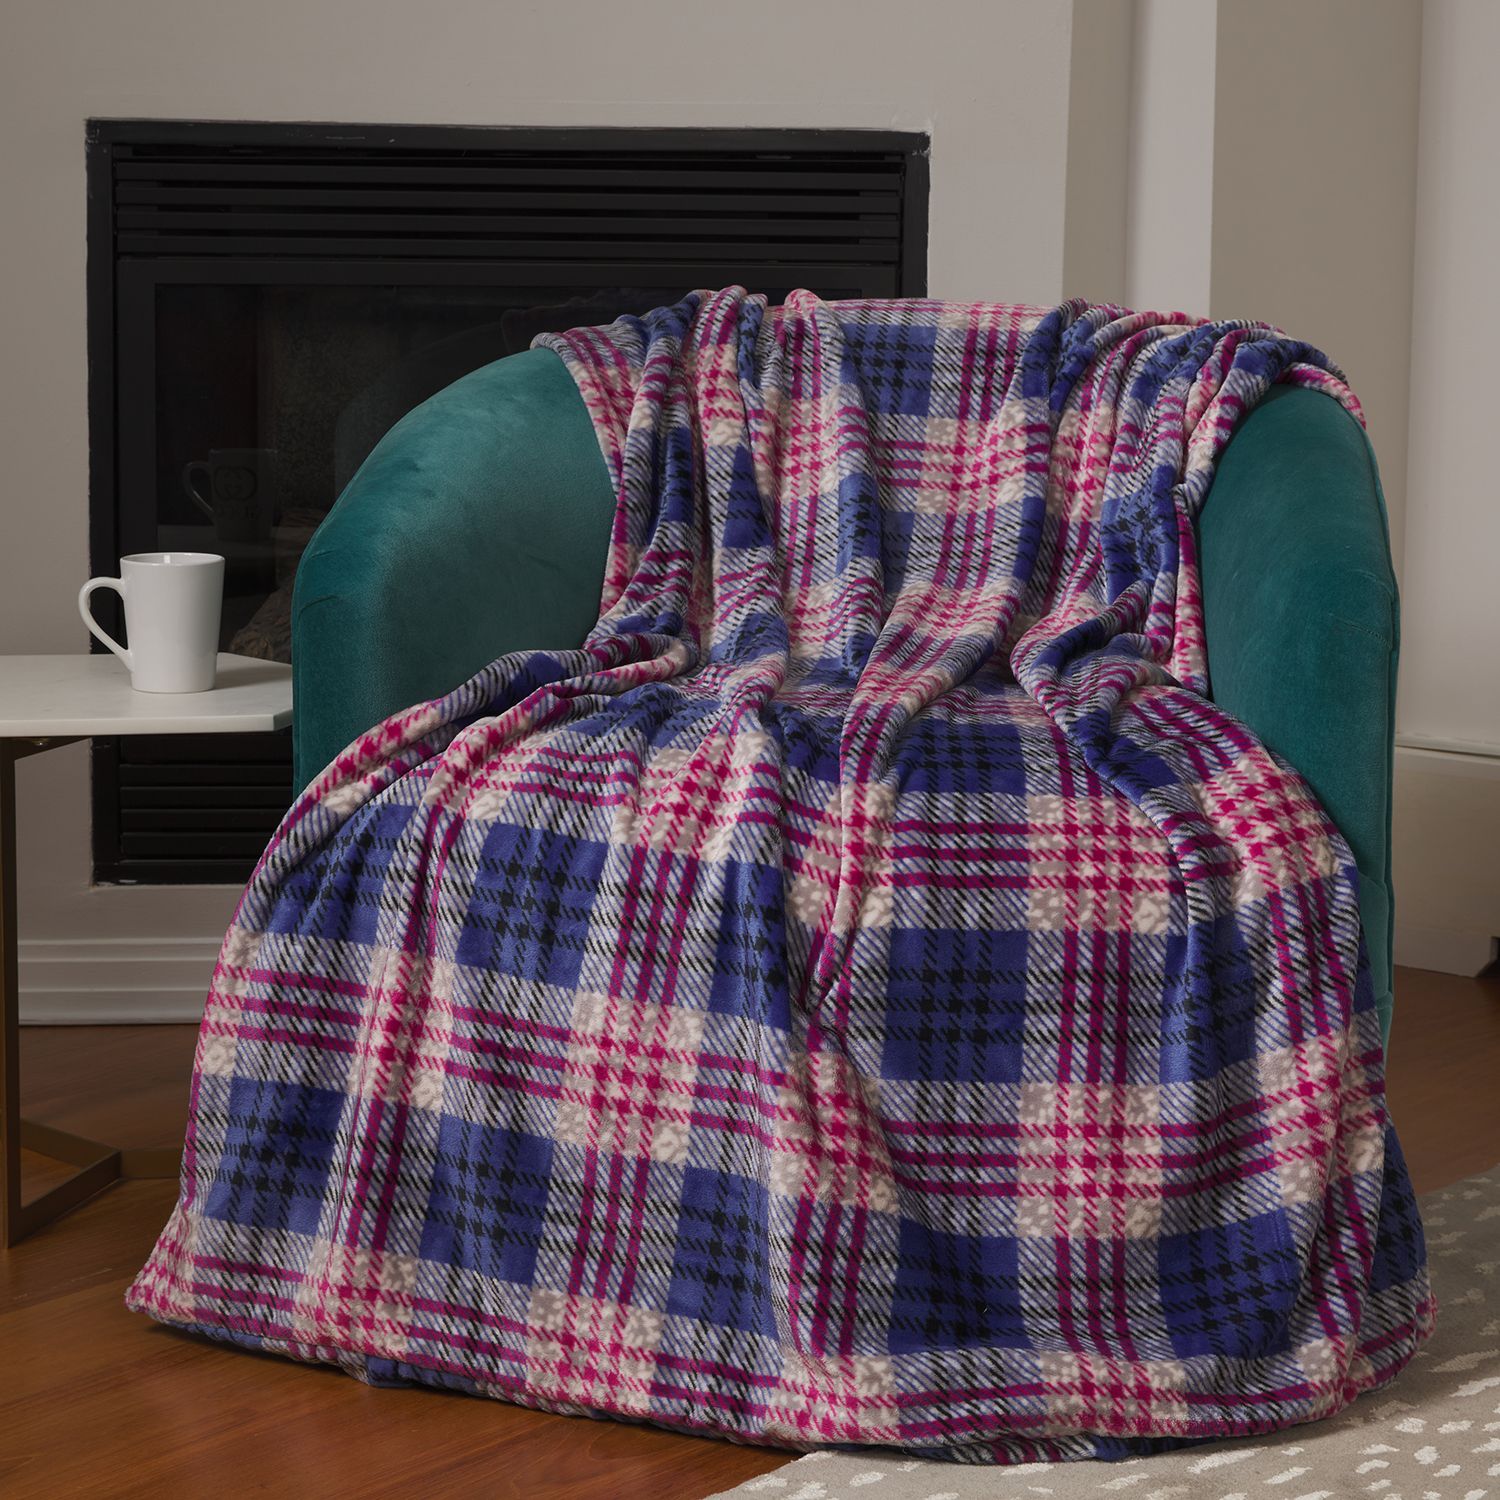 ClimateRight by Cuddl Duds Oversized Throw With A Cozy Sherpa Pocket For Your Feet, Red/Blue Plaid - image 2 of 6